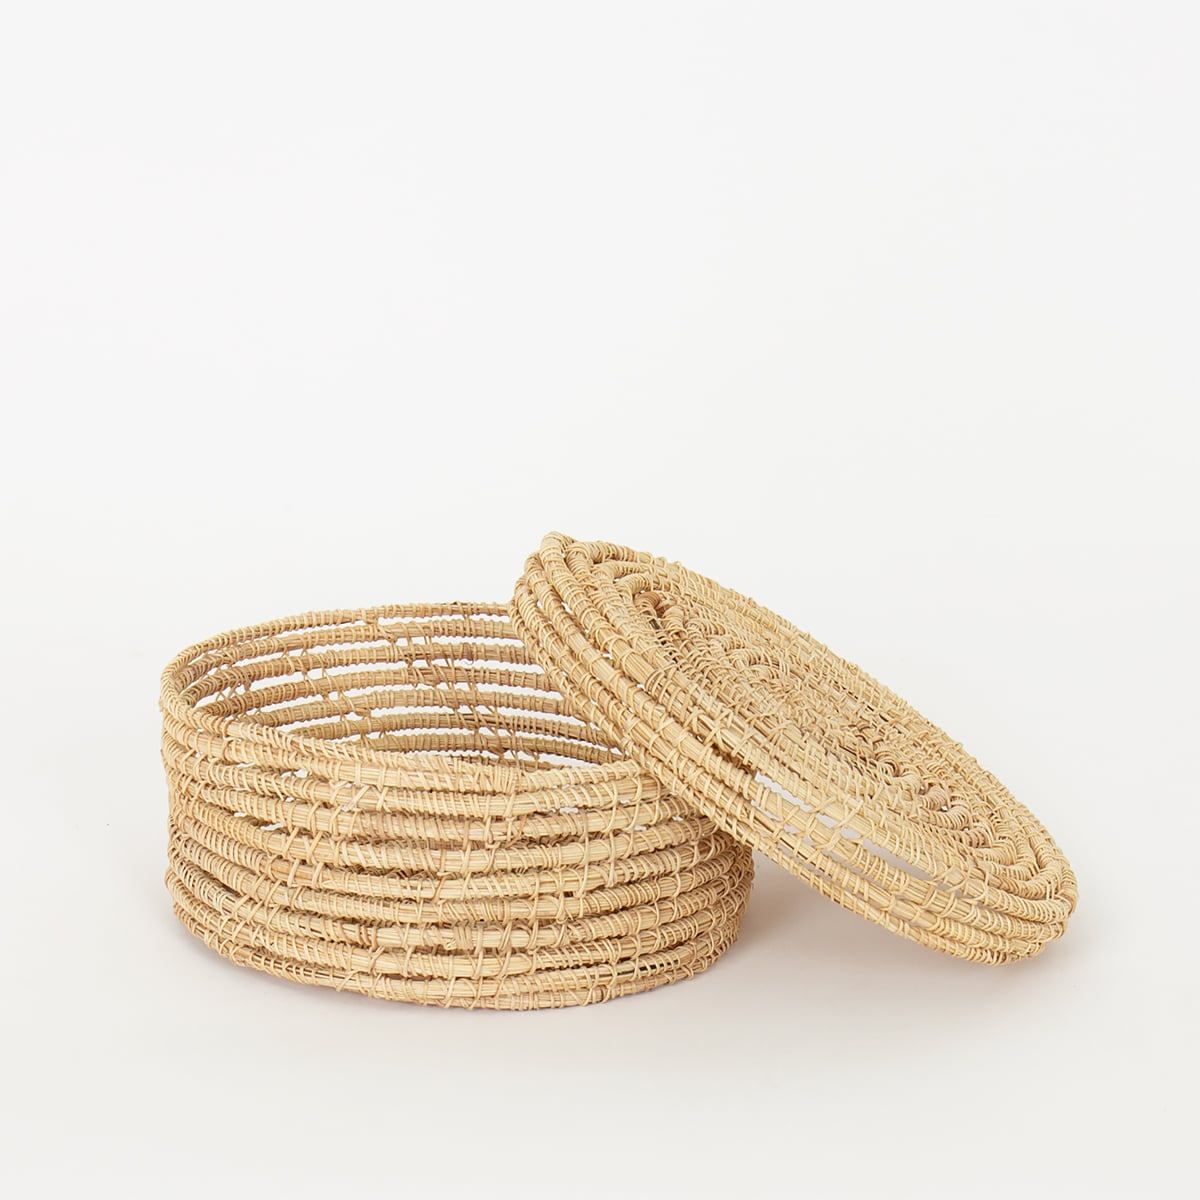 STRAW Basket with lid, S